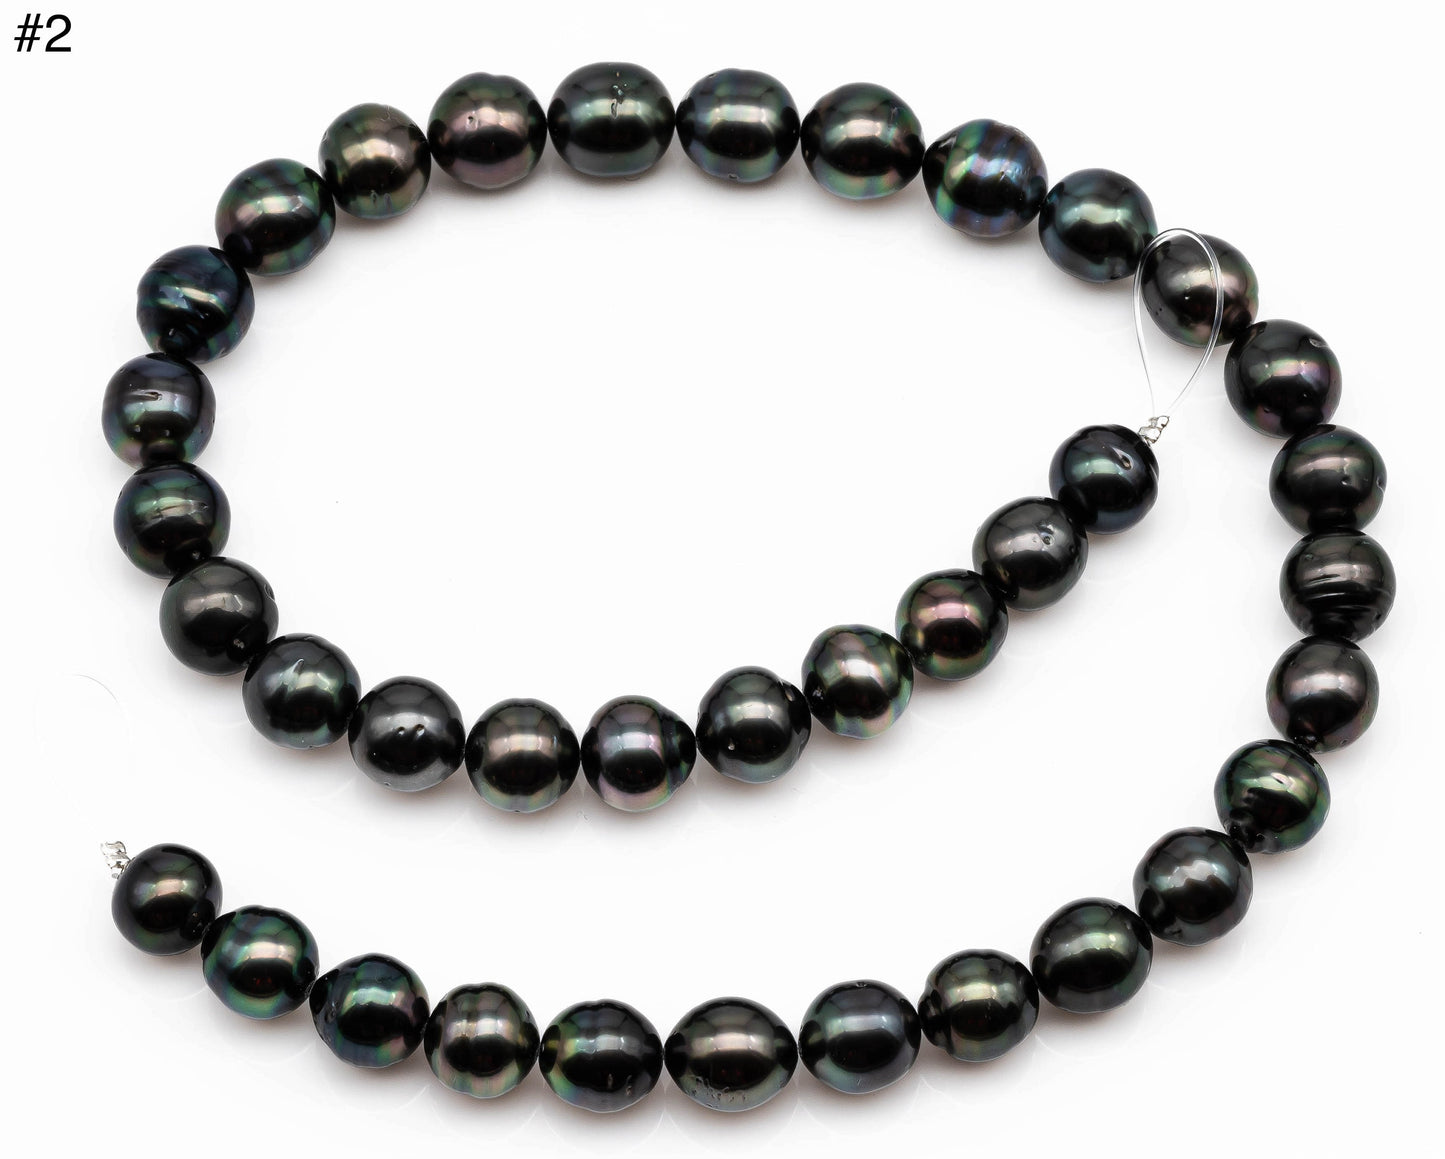 Full Strand Tahitian Pearl Near Round with High Luster and Blemishes, Natural Dark Color Pearl Bead for Making Jewelry, 10-11mm, SKU#1096TH